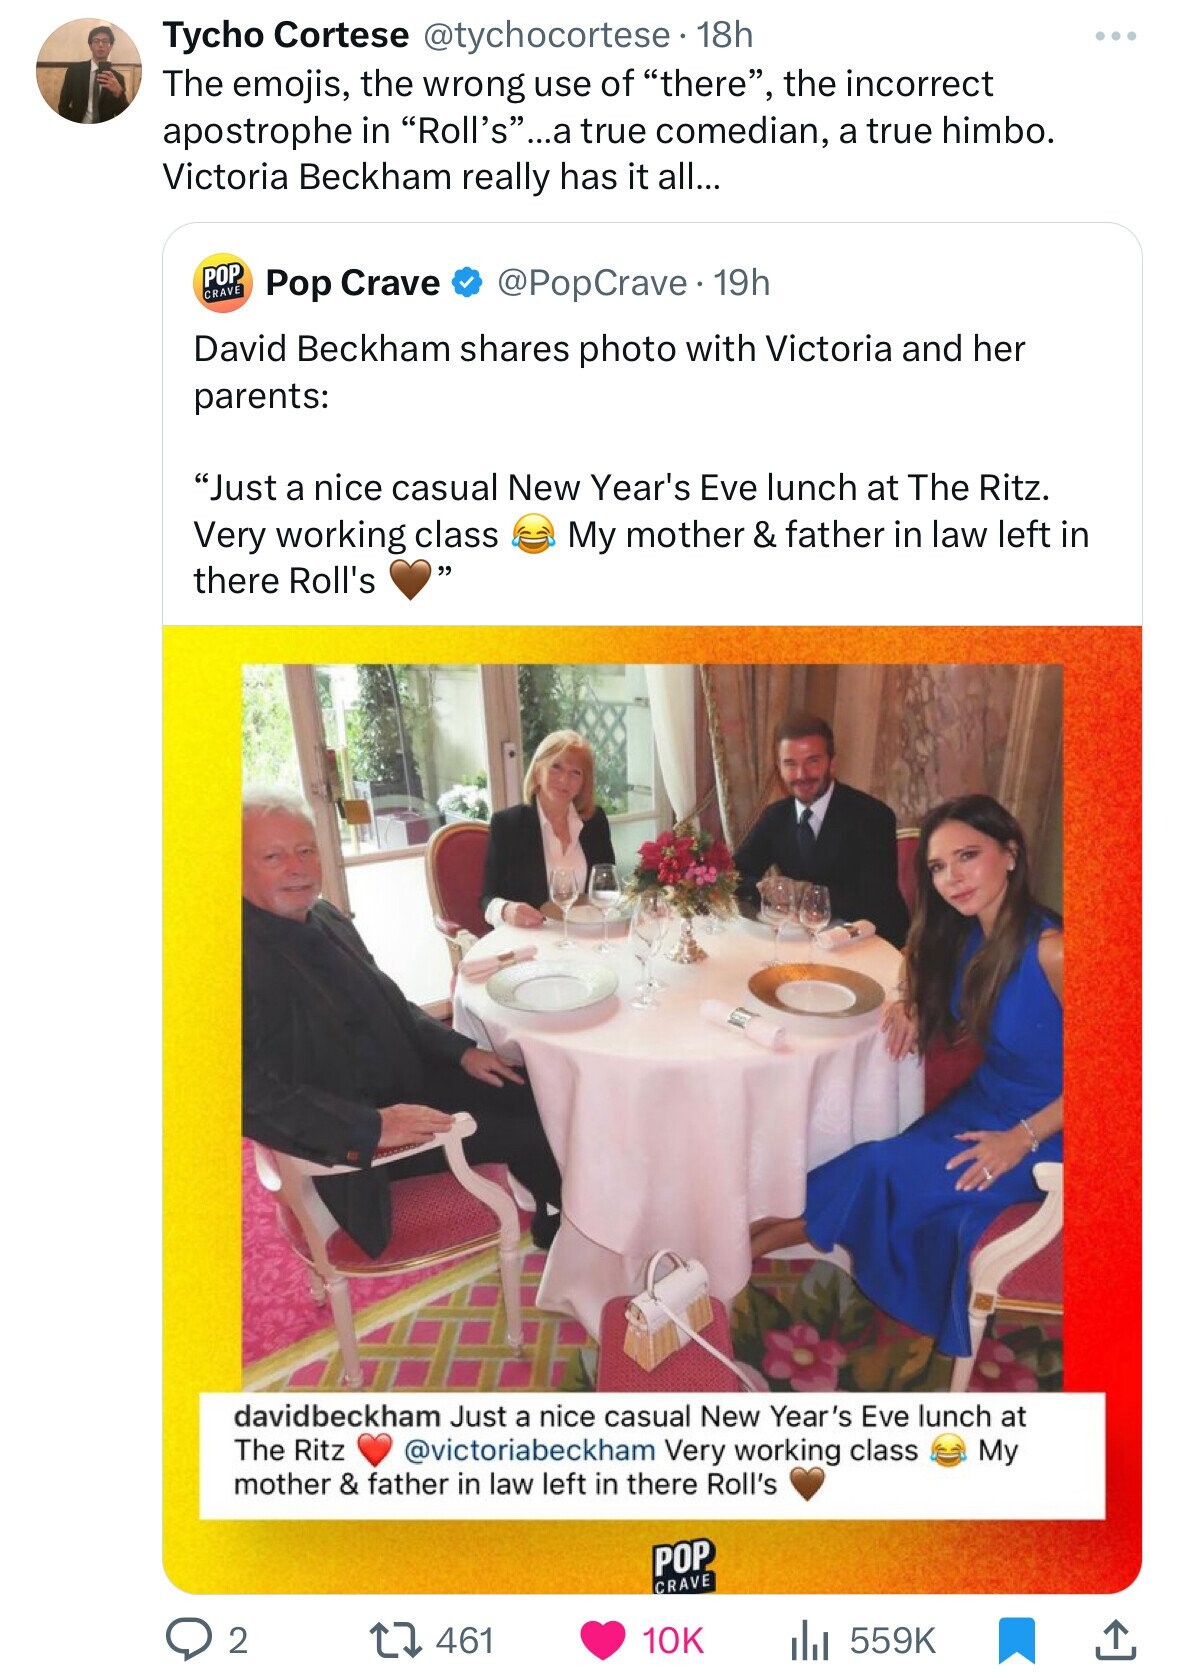 media - Tycho Cortese 18h The emojis, the wrong use of "there", the incorrect apostrophe in "Roll's"...a true comedian, a true himbo. Victoria Beckham really has it all... Pop Pop Crave Crave 19h David Beckham photo with Victoria and her parents "Just a n